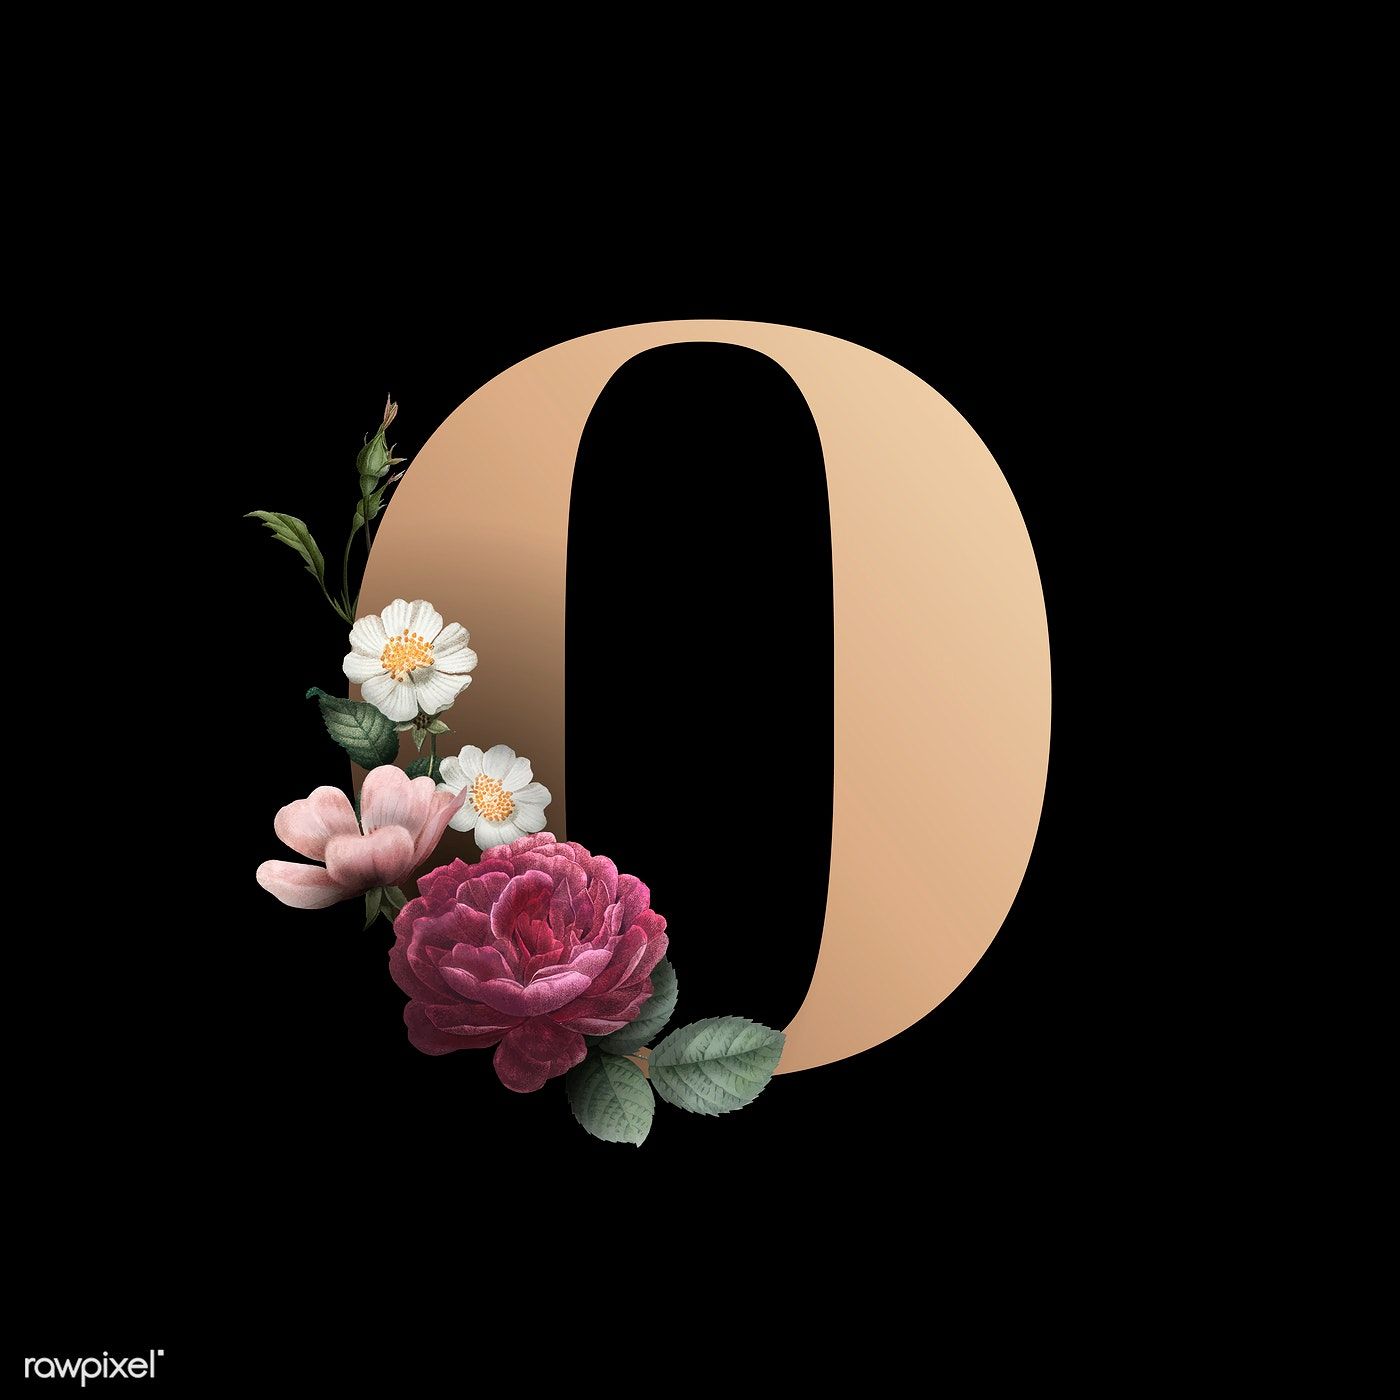 Classic and elegant floral alphabet font letter O vector. free image by rawpixel.com / manotang. Lettering alphabet fonts, Fonts alphabet, Lettering fonts